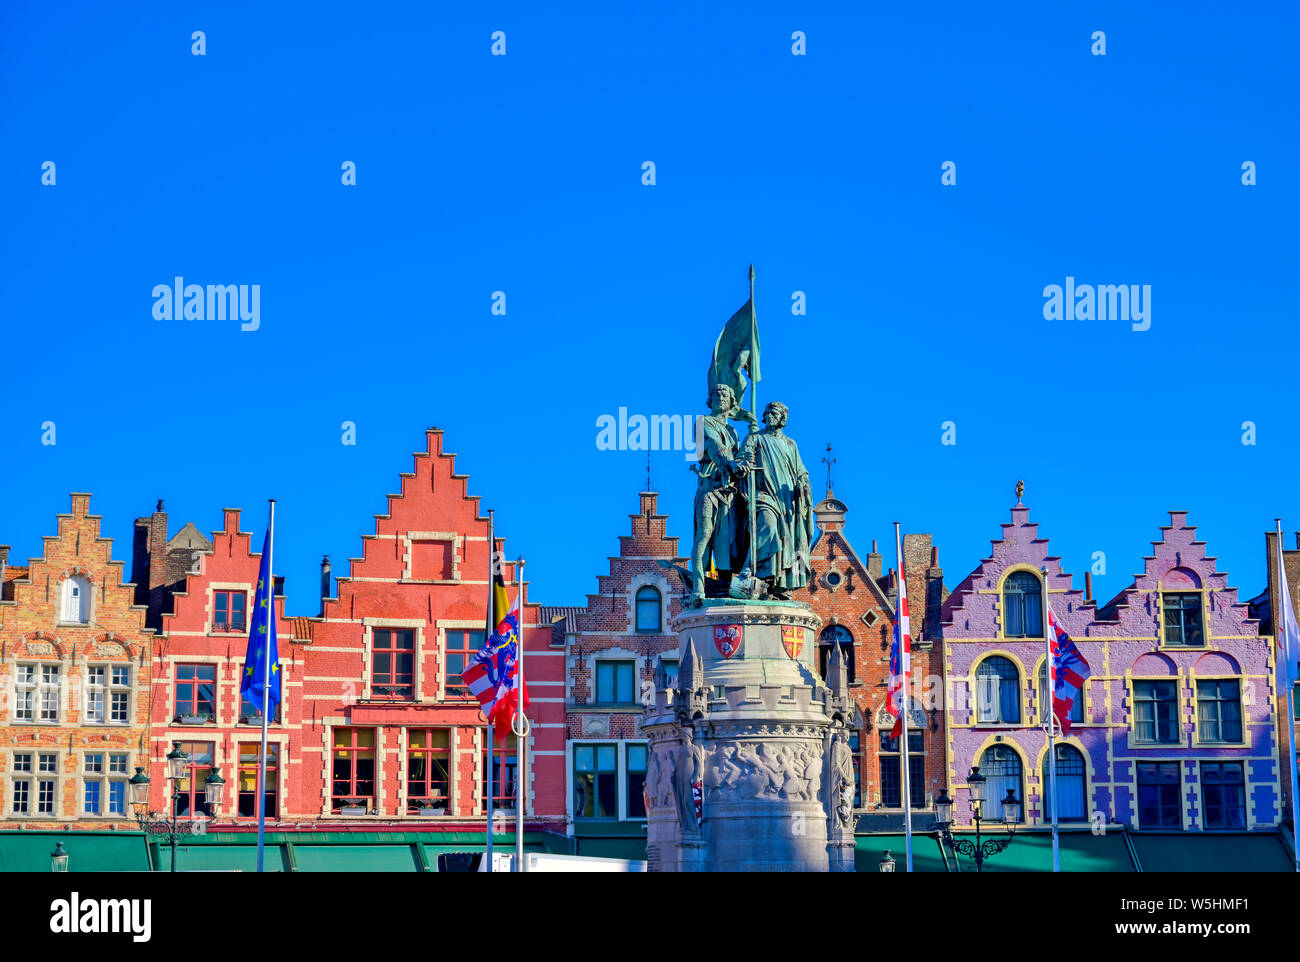 The historical city center and Market Square (Markt) in Bruges (Brugge), Belgium. Stock Photo